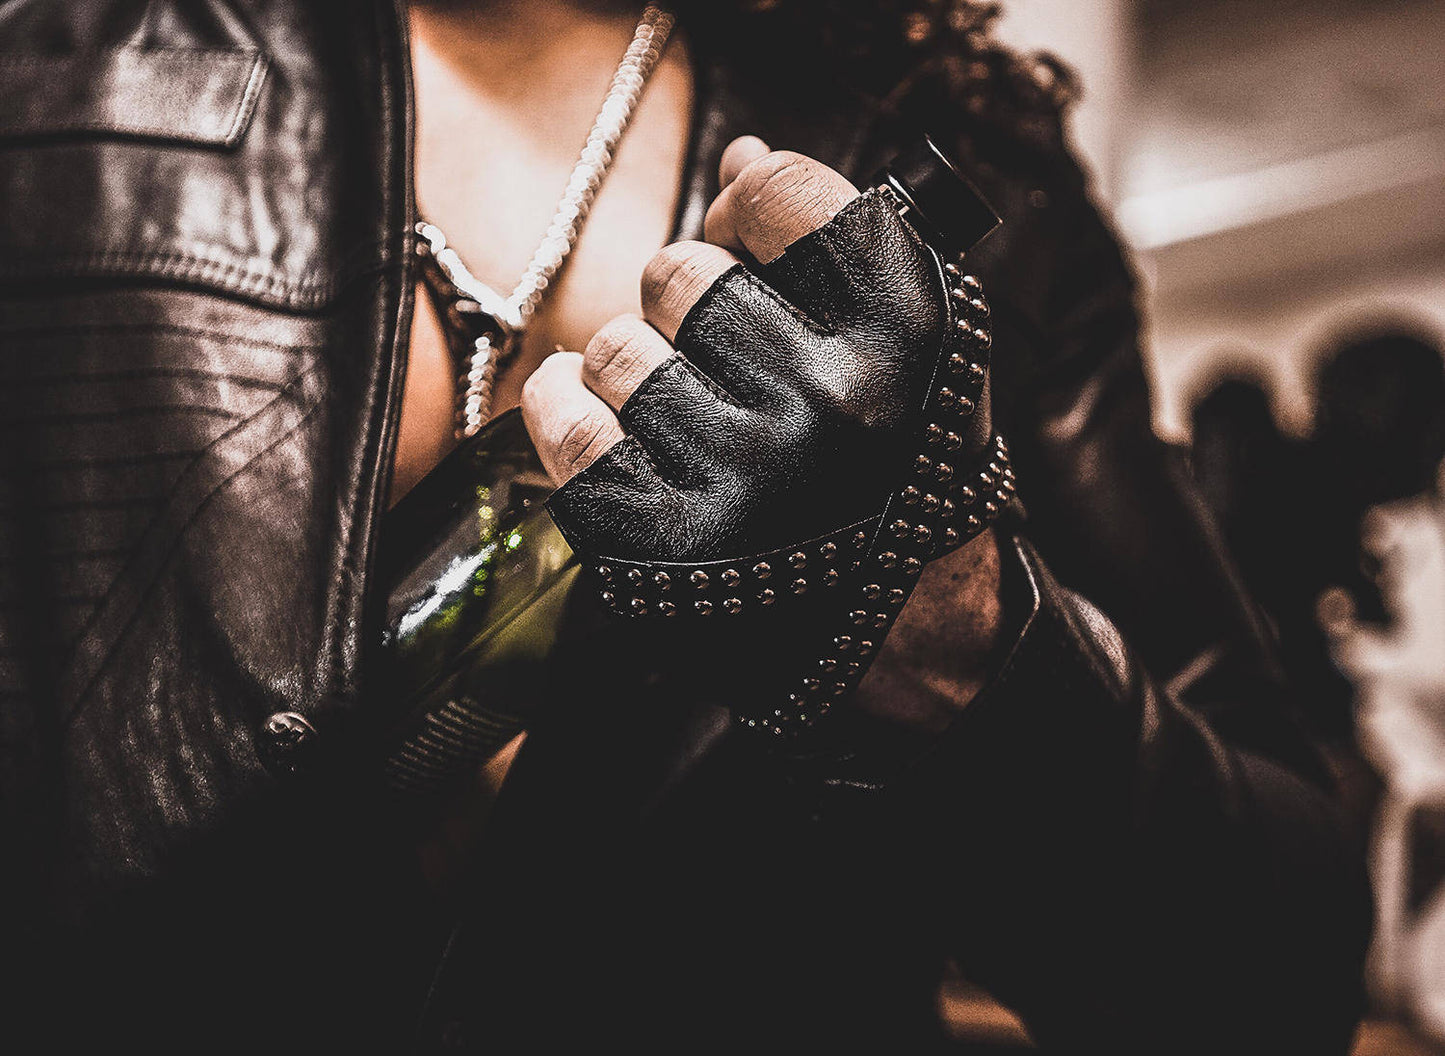 Fingerless Punk Gloves Made of Leather